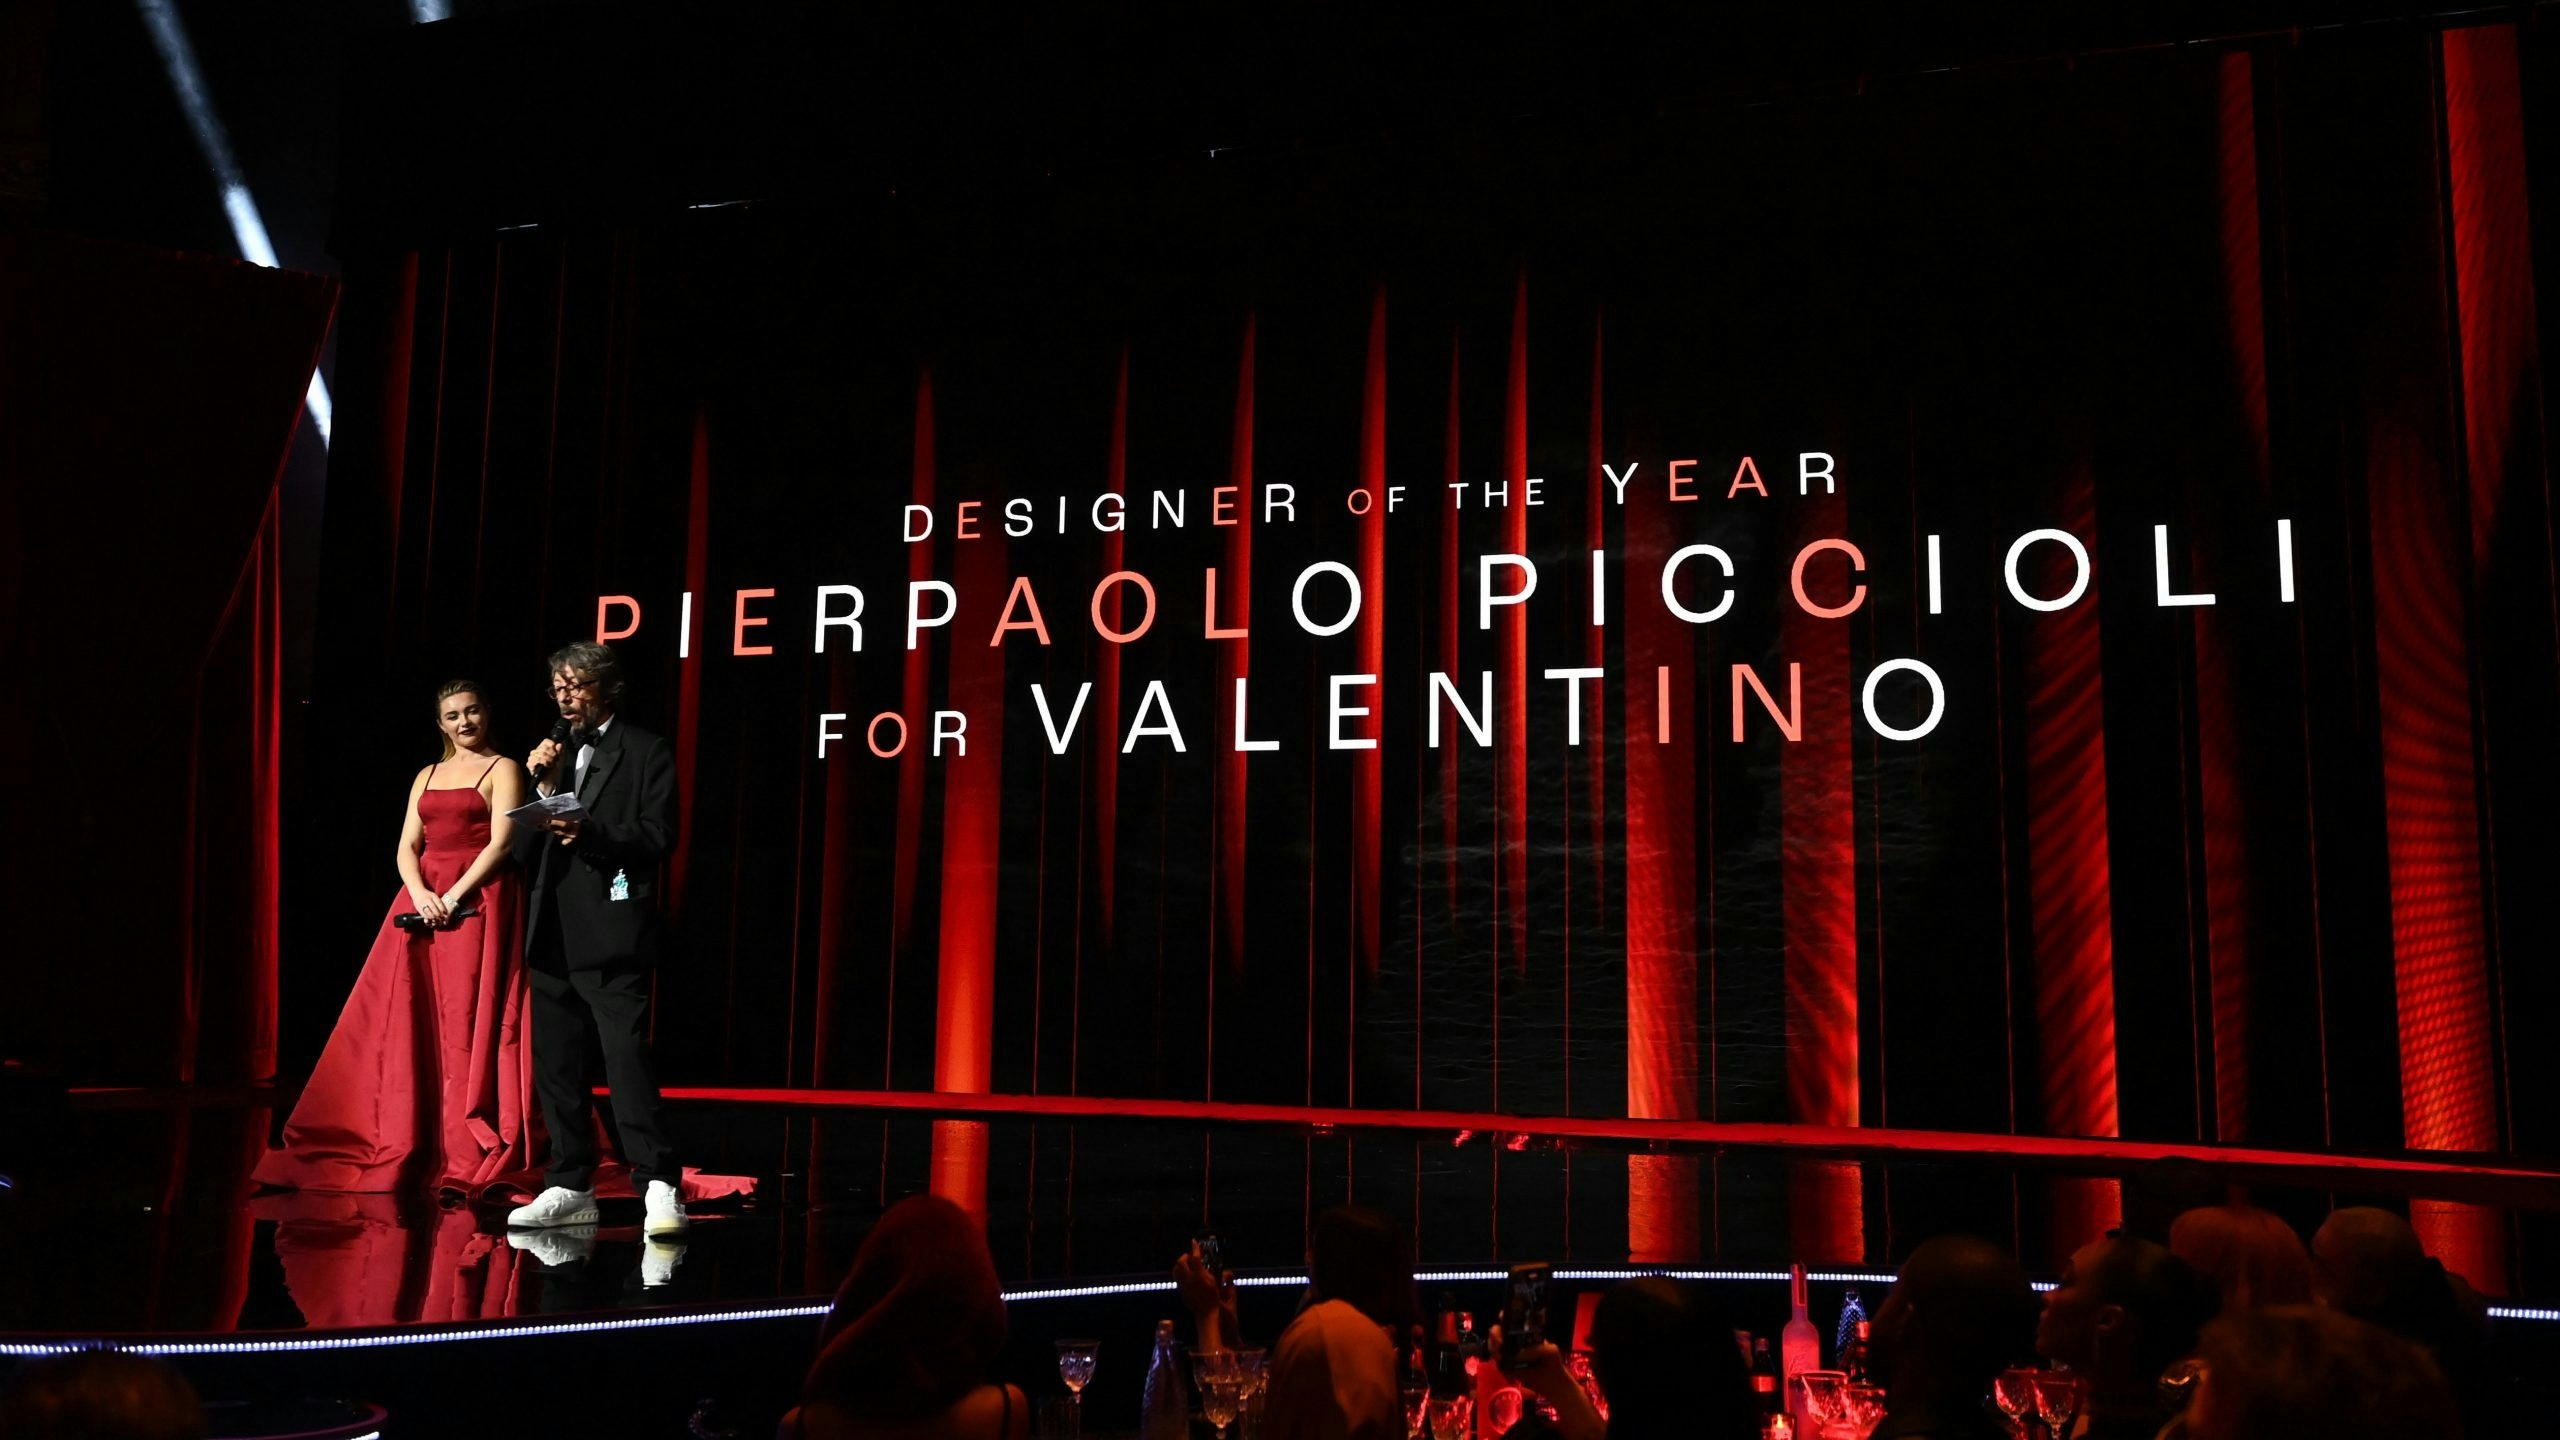 Florence Pugh presents the designer of the year award to Pierpaolo Piccioli for Valentino during The Fashion Awards 2022. Photo: Getty Images for BFC